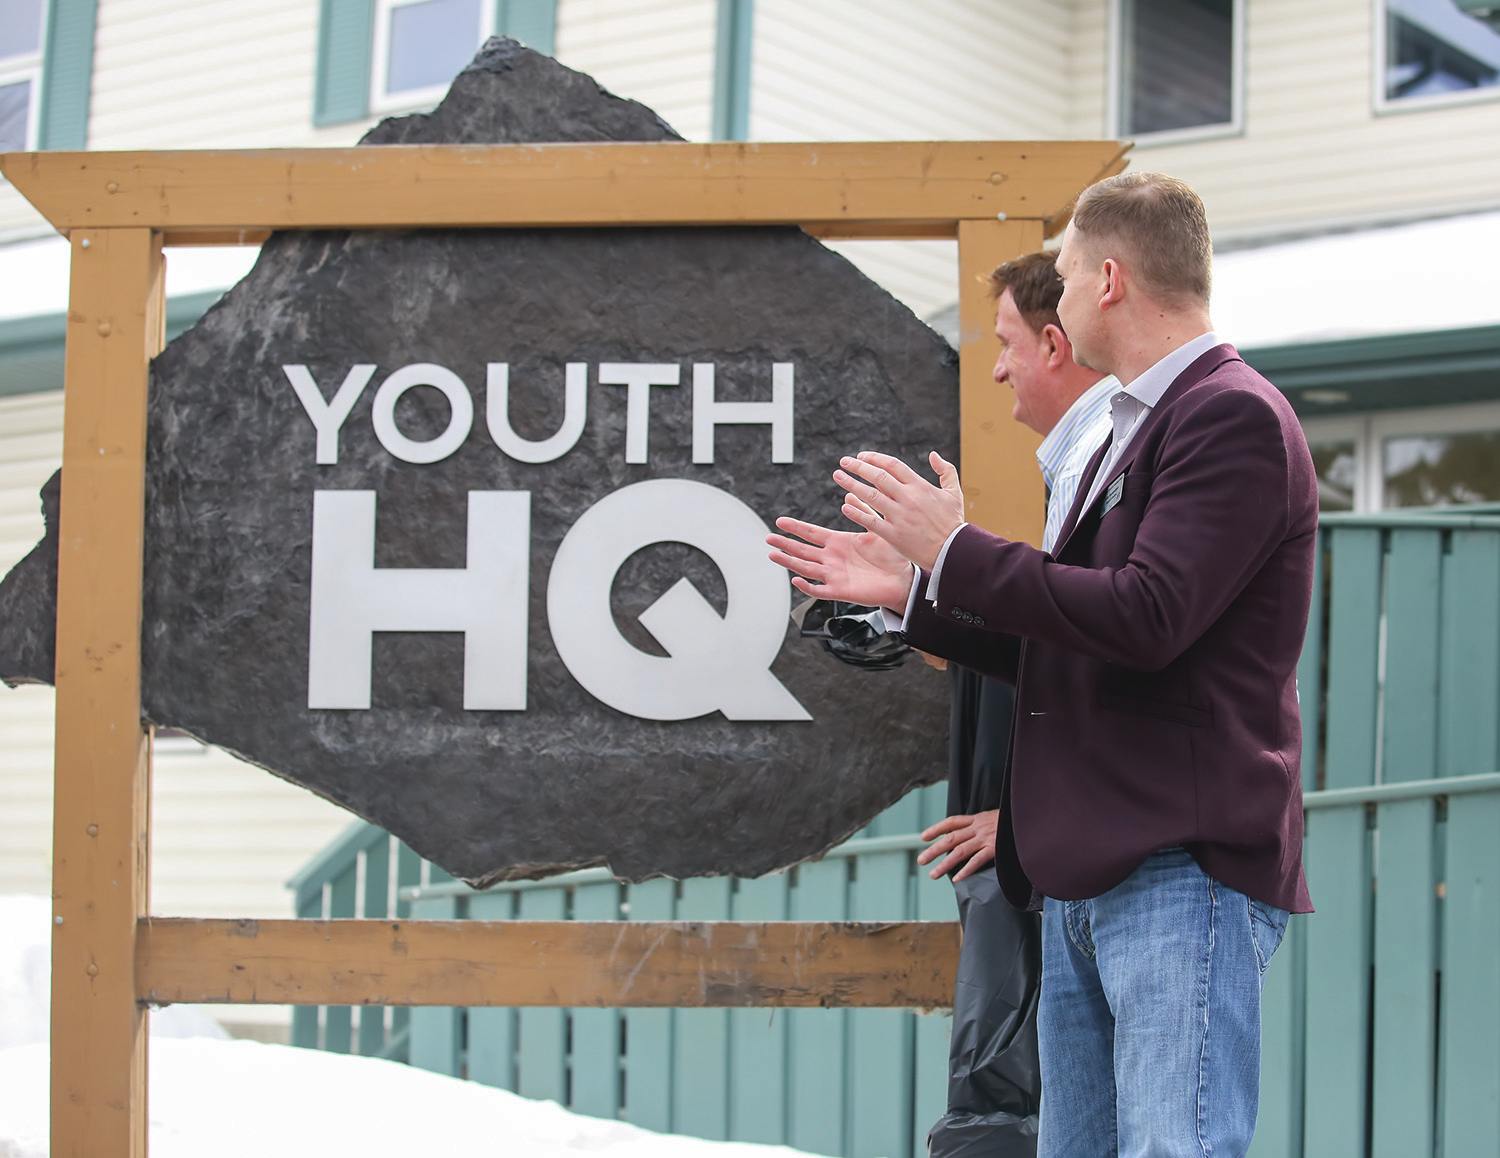 CELEBRATION - The Red Deer Youth and Volunteer Centre began a new chapter in their 40 year history last week after announcing a name change to Youth HQ.